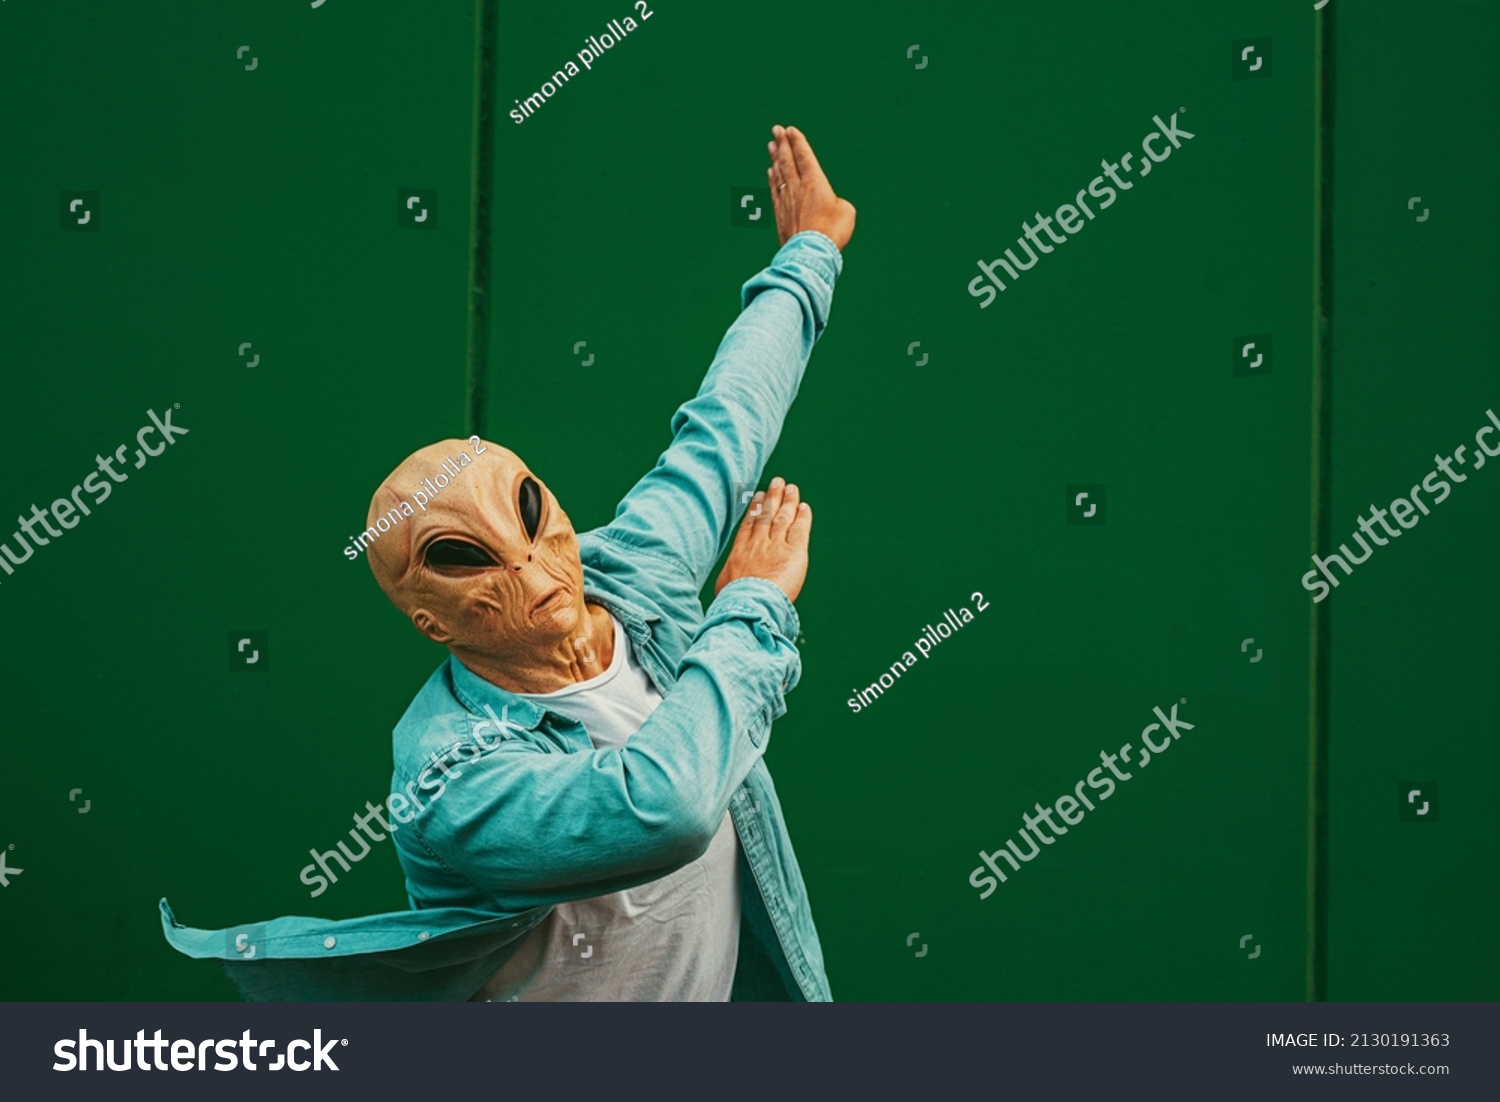 Alien doing dab posture and gesture against a green wall background. Extraterrestrial with human clothes. Concept of victory and satisfaction. Happiness and freedom immigration concept #2130191363